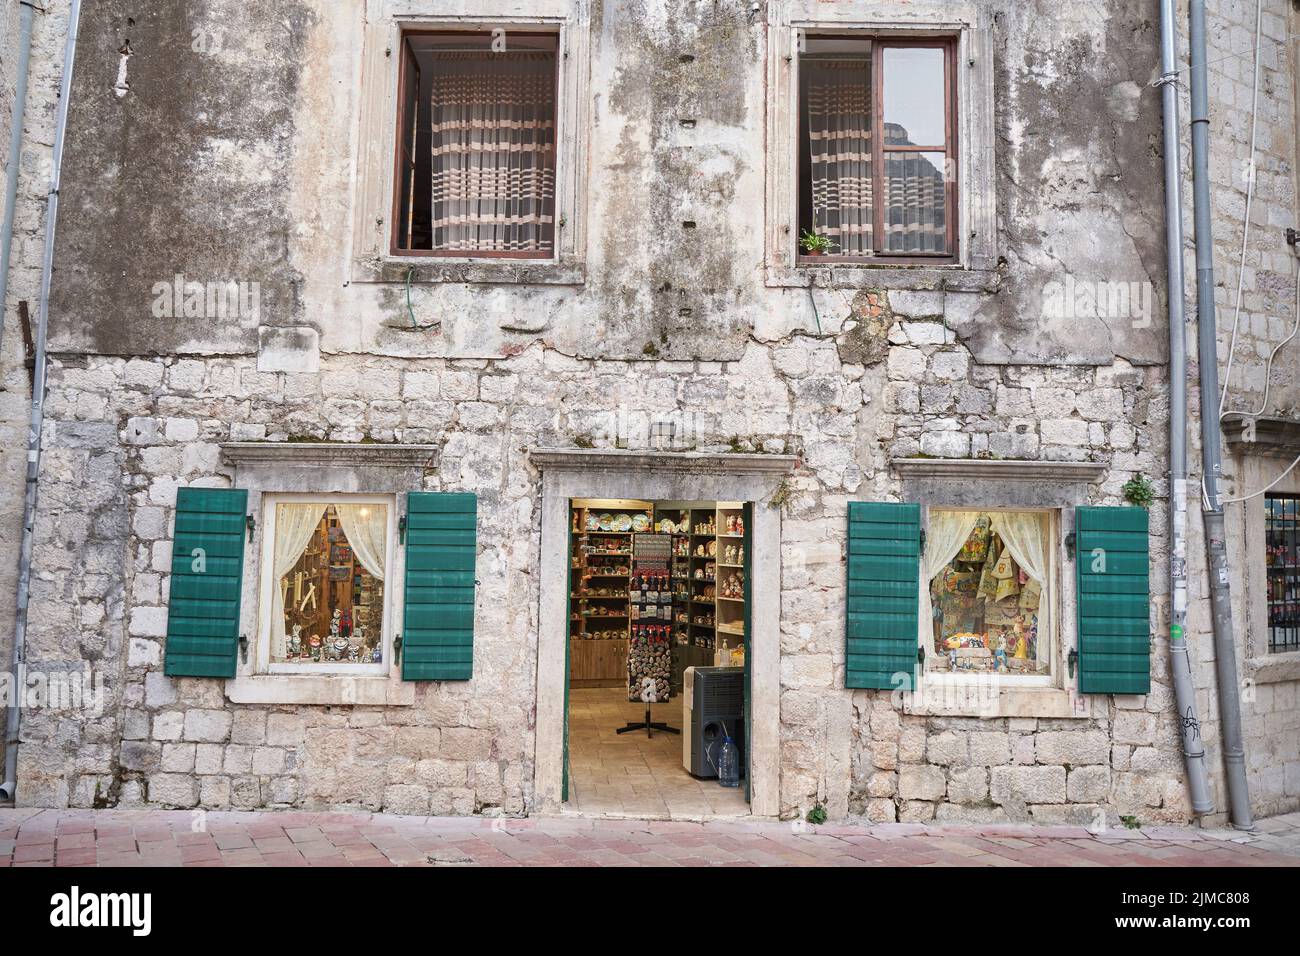 Gift shops in old town of Kotor, Montenegro. Stock Photo